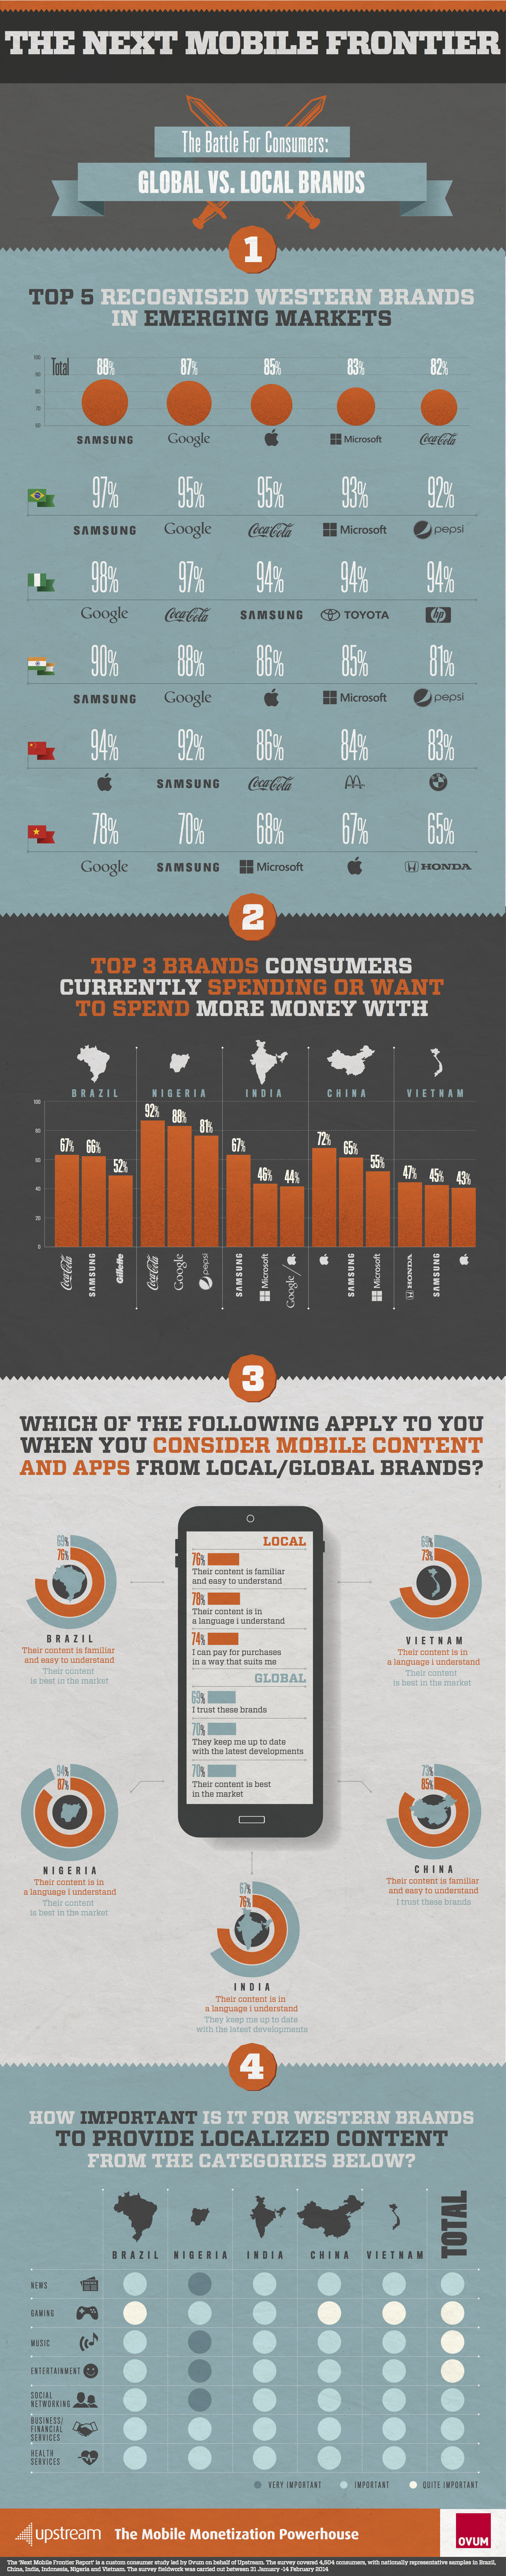 Infographic_local-global_2014 copy